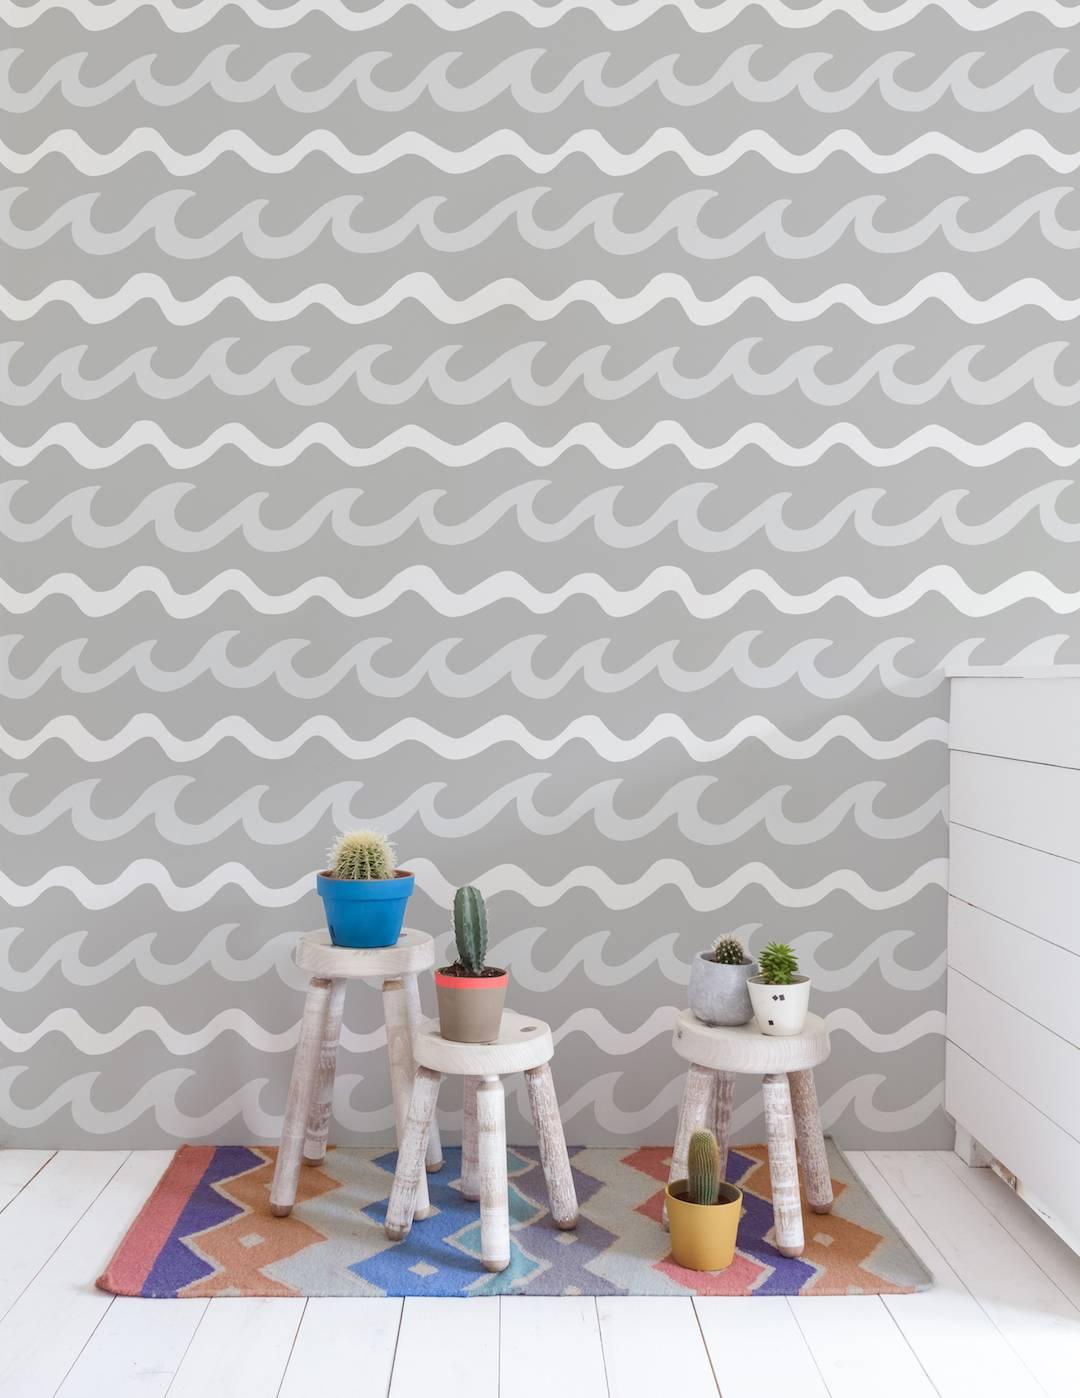 This beautiful wave wallpaper, a collaboration with Los Angeles-based surf-apparel brand Mowgli surf, is the perfect décor for your home or business.
 
Samples are available for $18 including US shipping, please message us to purchase.  

Printing: